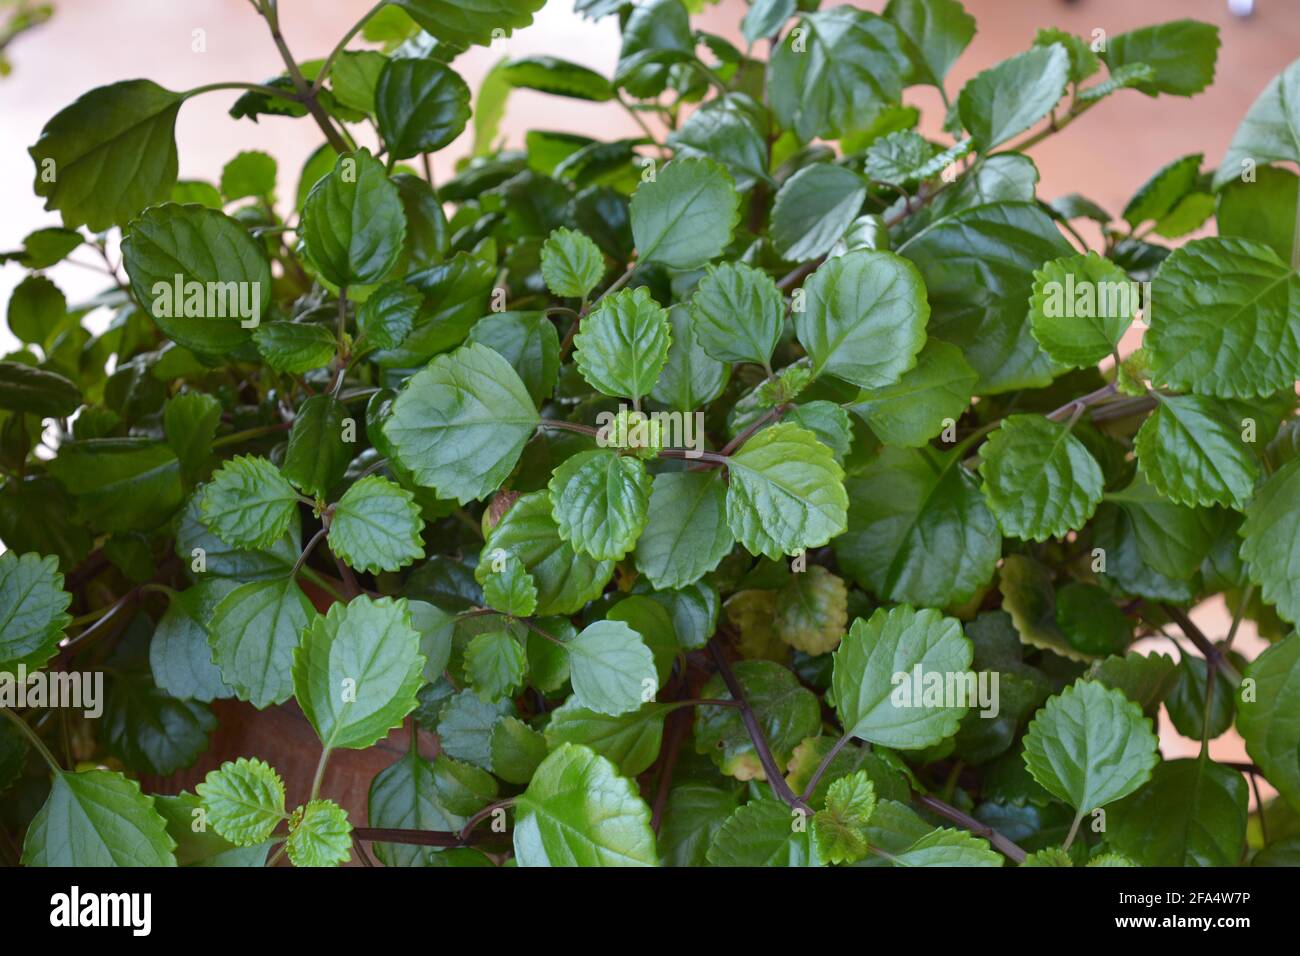 Swedish ivy plant also known as Plectranthus verticillatus, Swedish begonia or whorled plectranthus Stock Photo